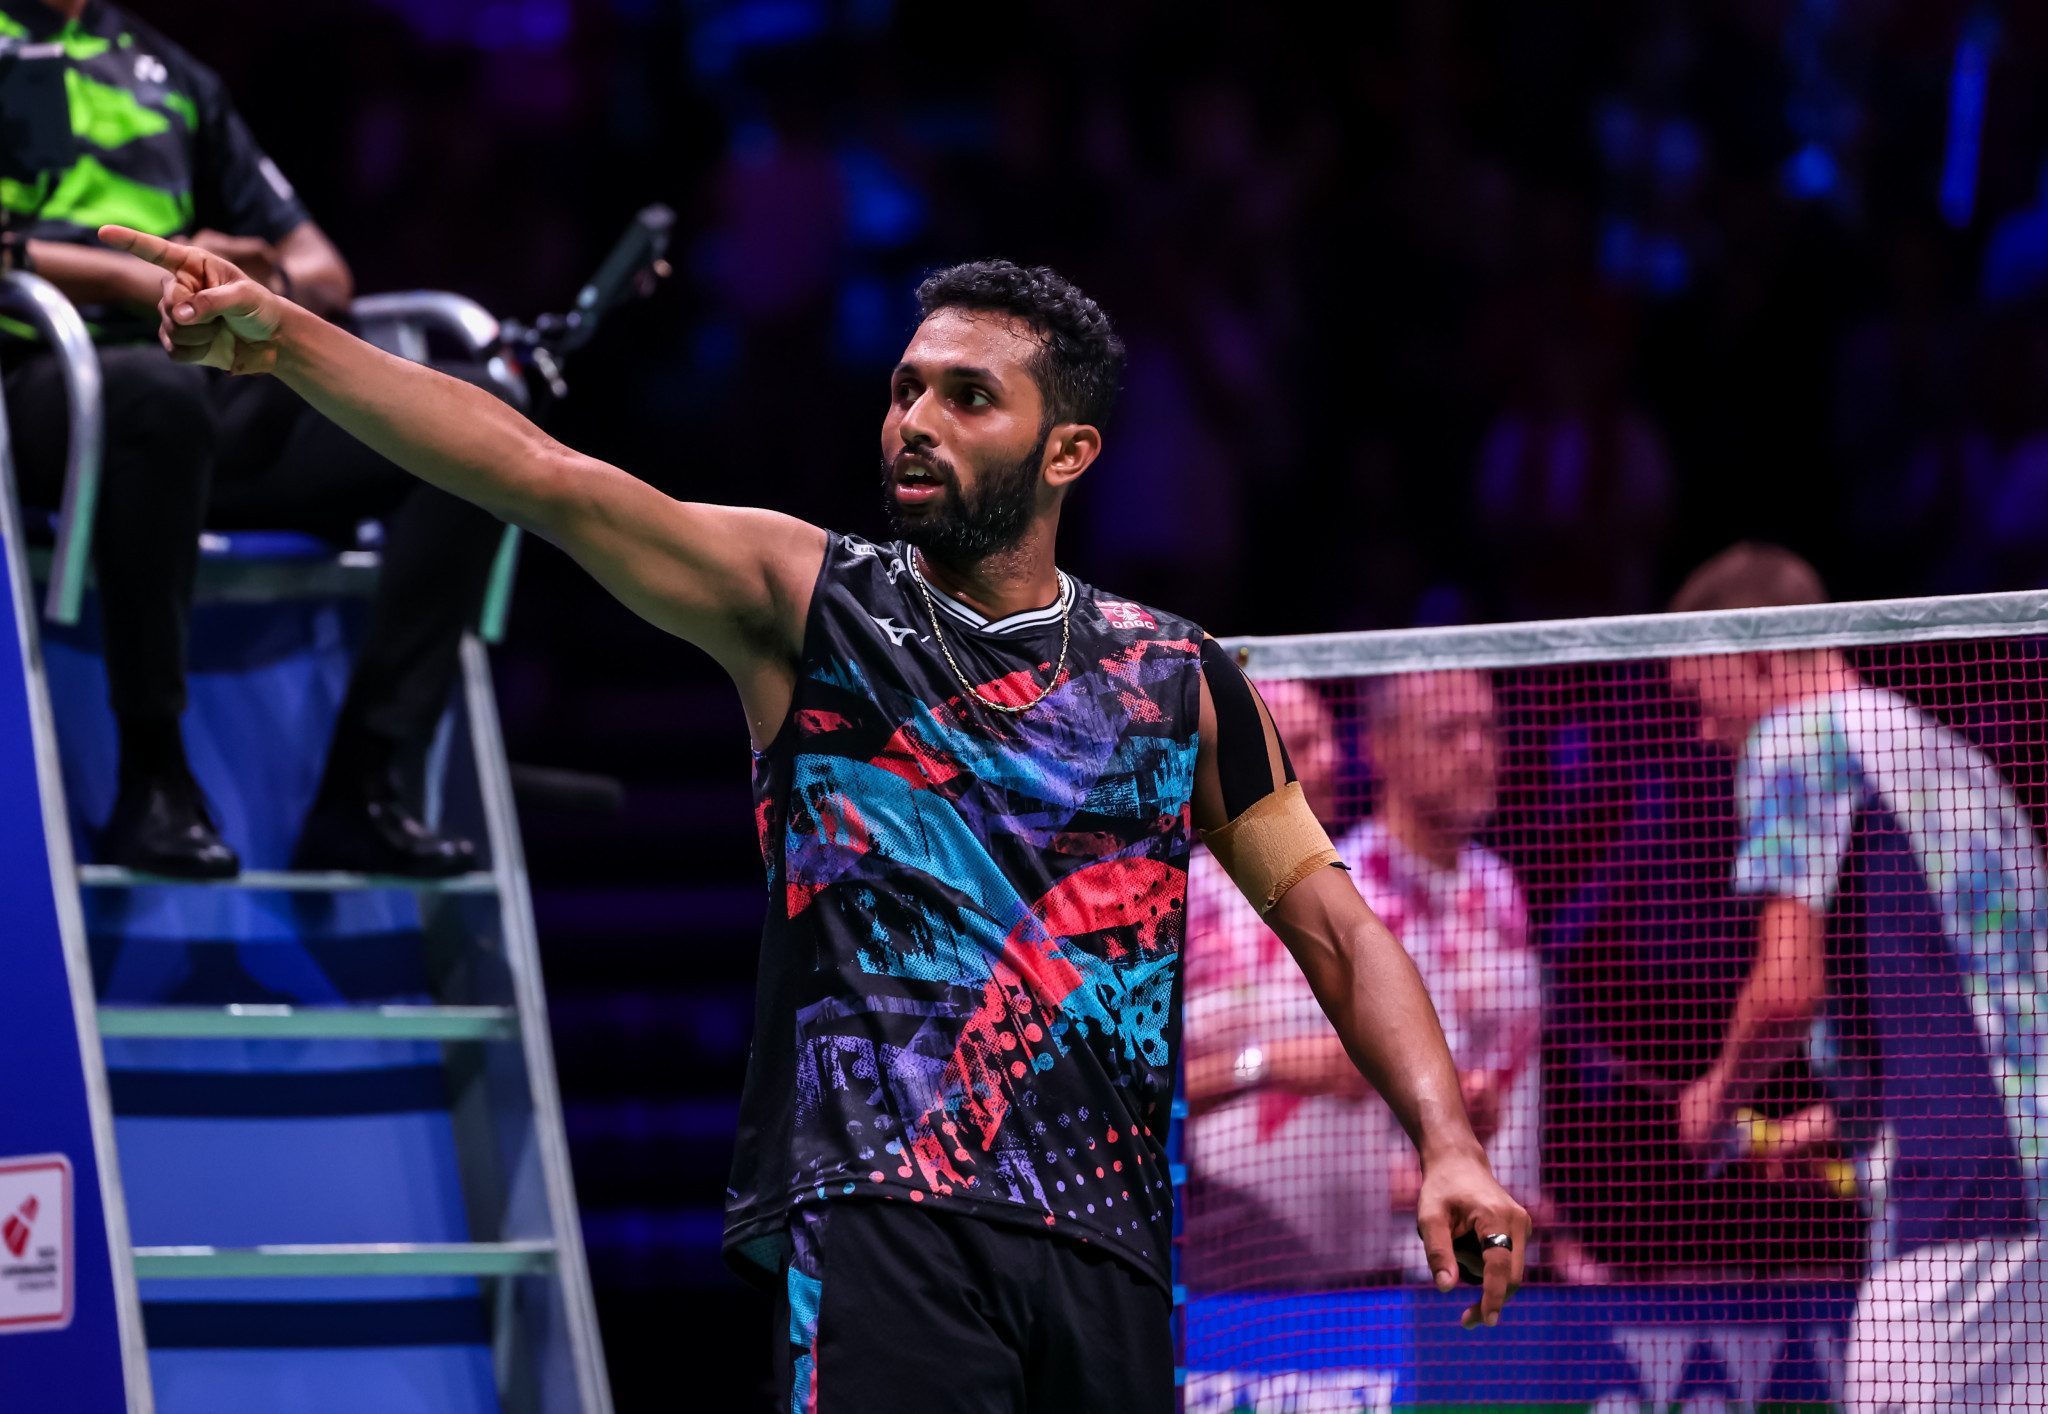 Prannoy upsets home hero Axelsen to make last four at BWF World Championships